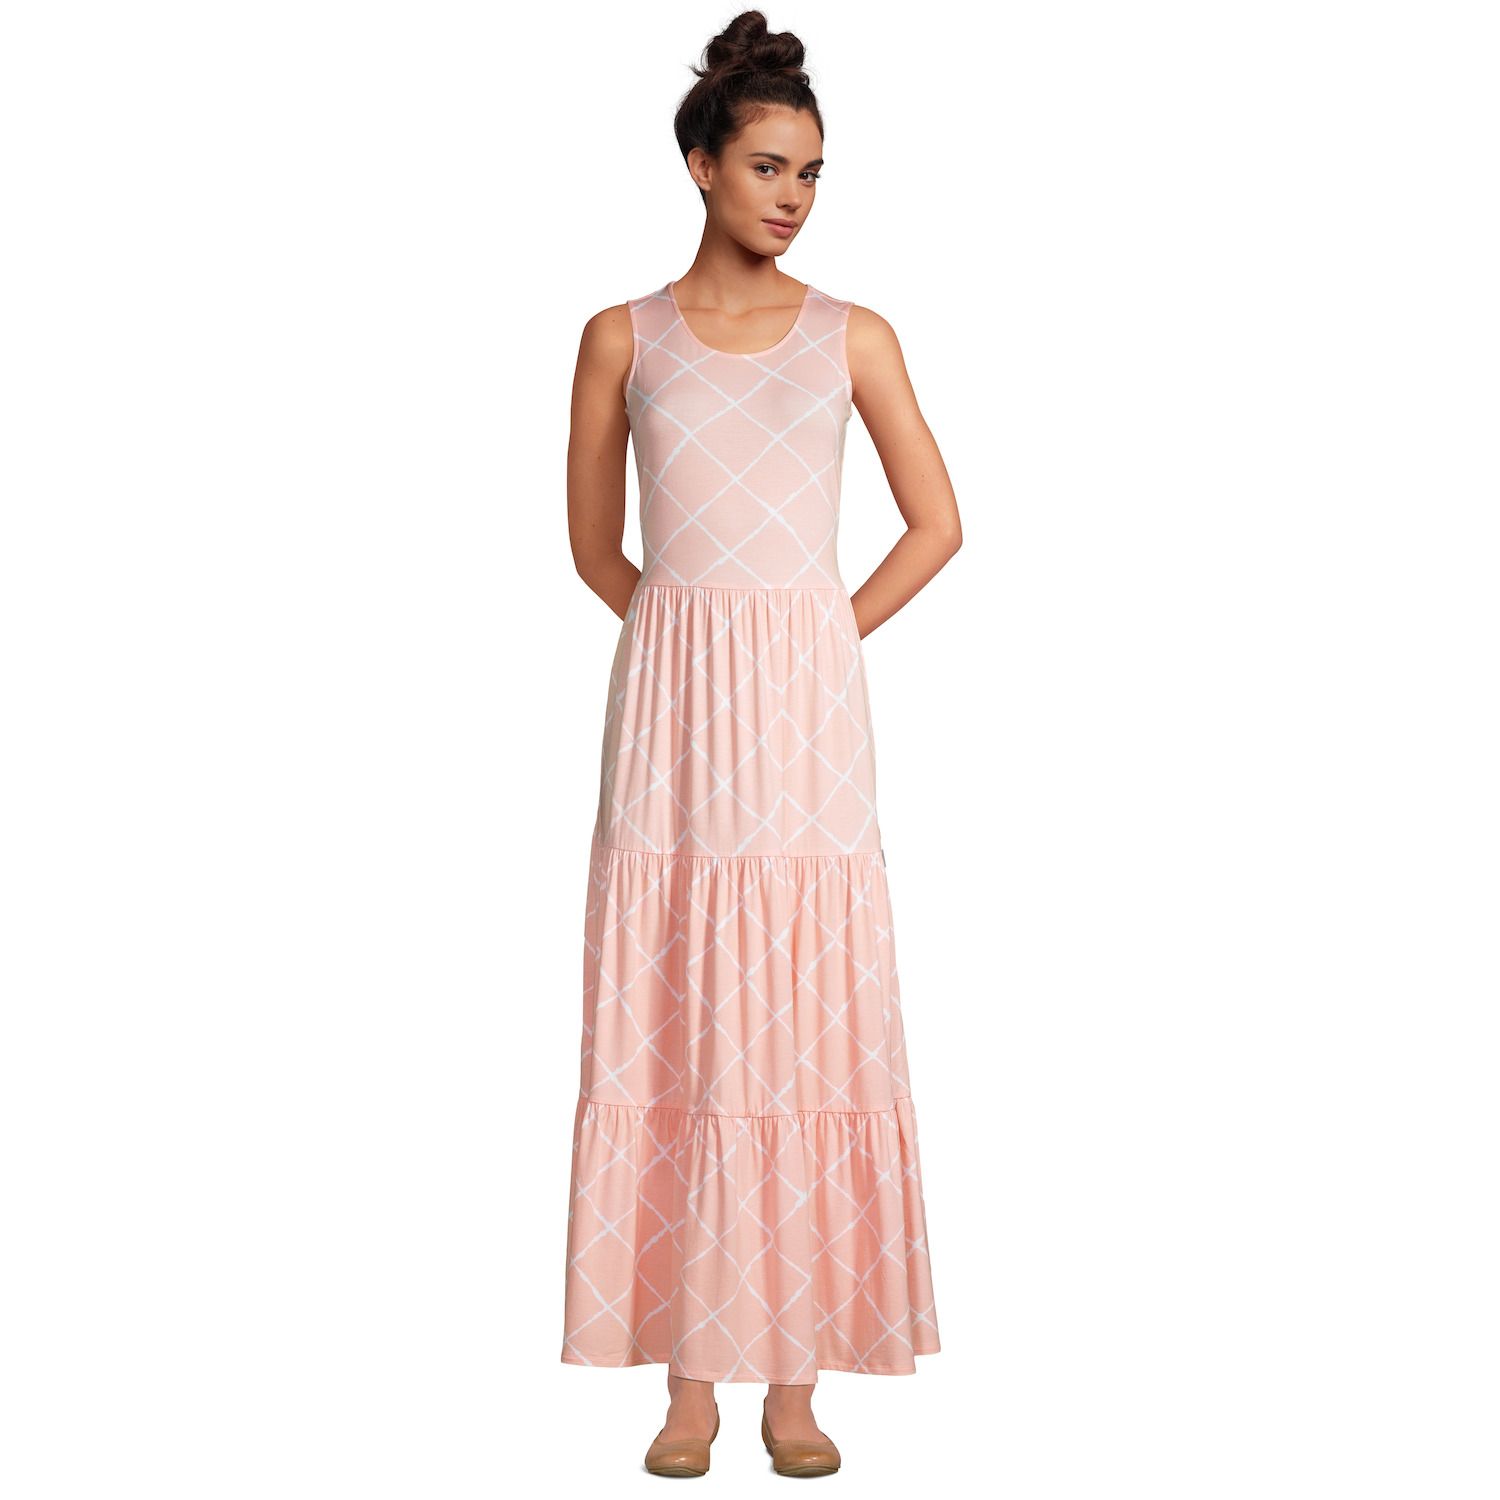 Image for Lands' End Petite Sleeveless Tiered Maxi Dress at Kohl's.